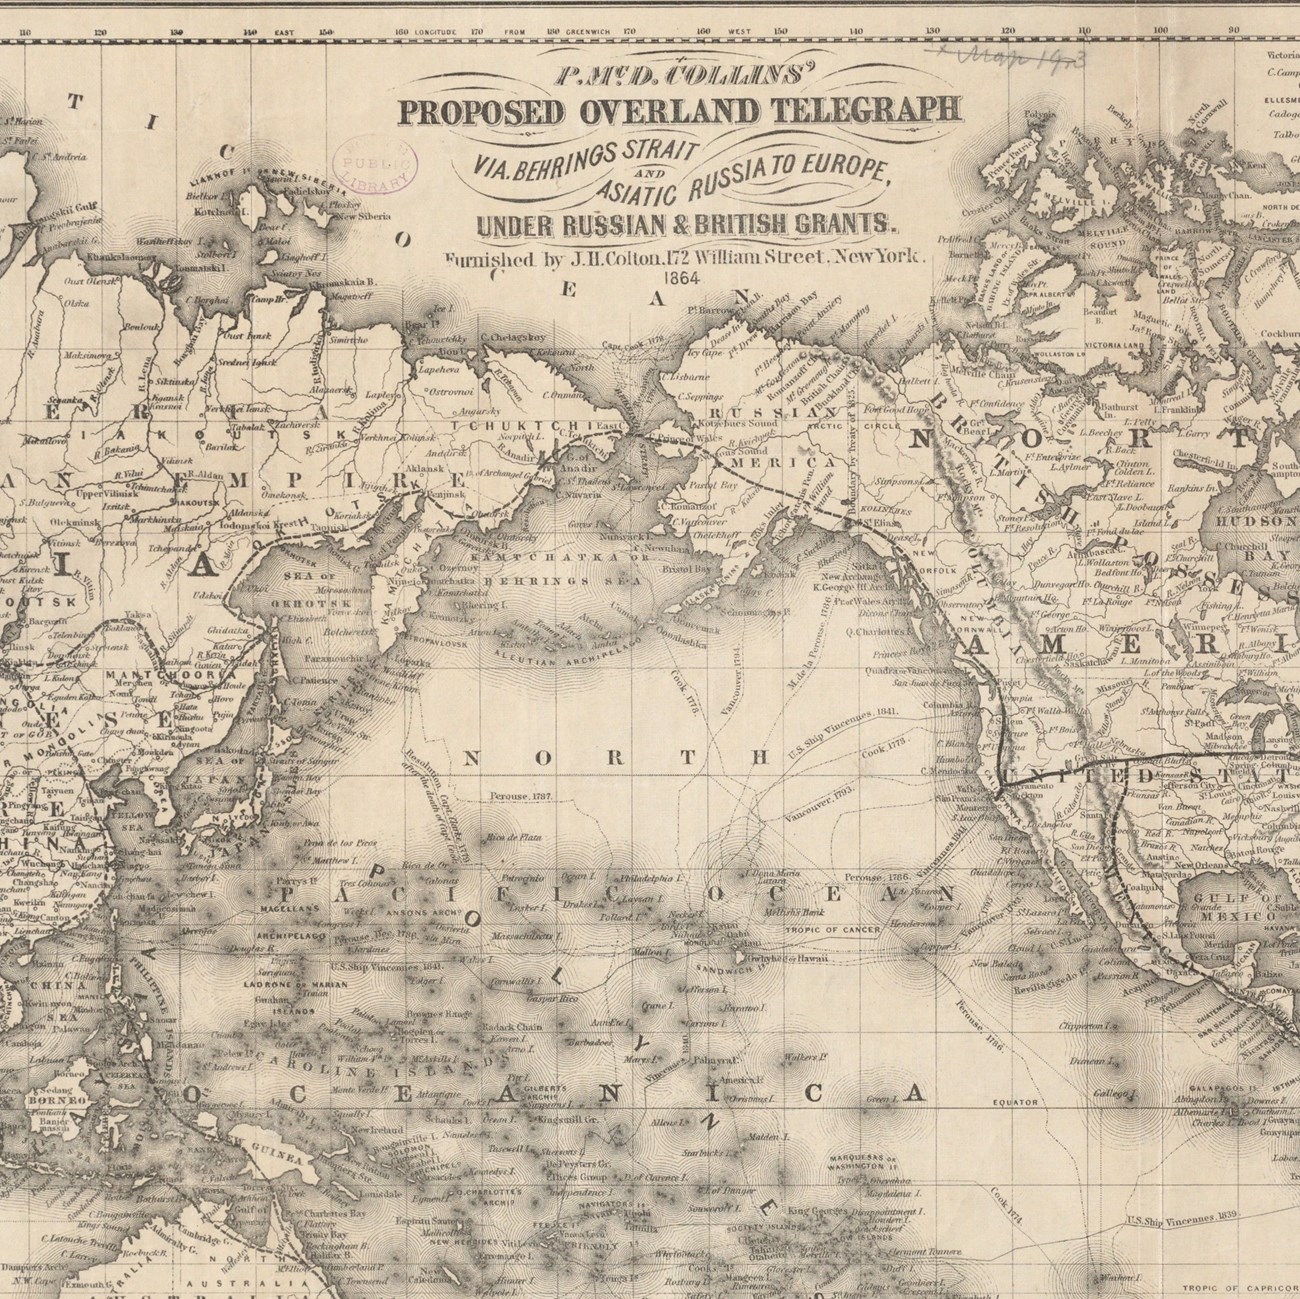 Map of proposed overland telegraph via the Bering Strait and Asiatic Russia to Europe.